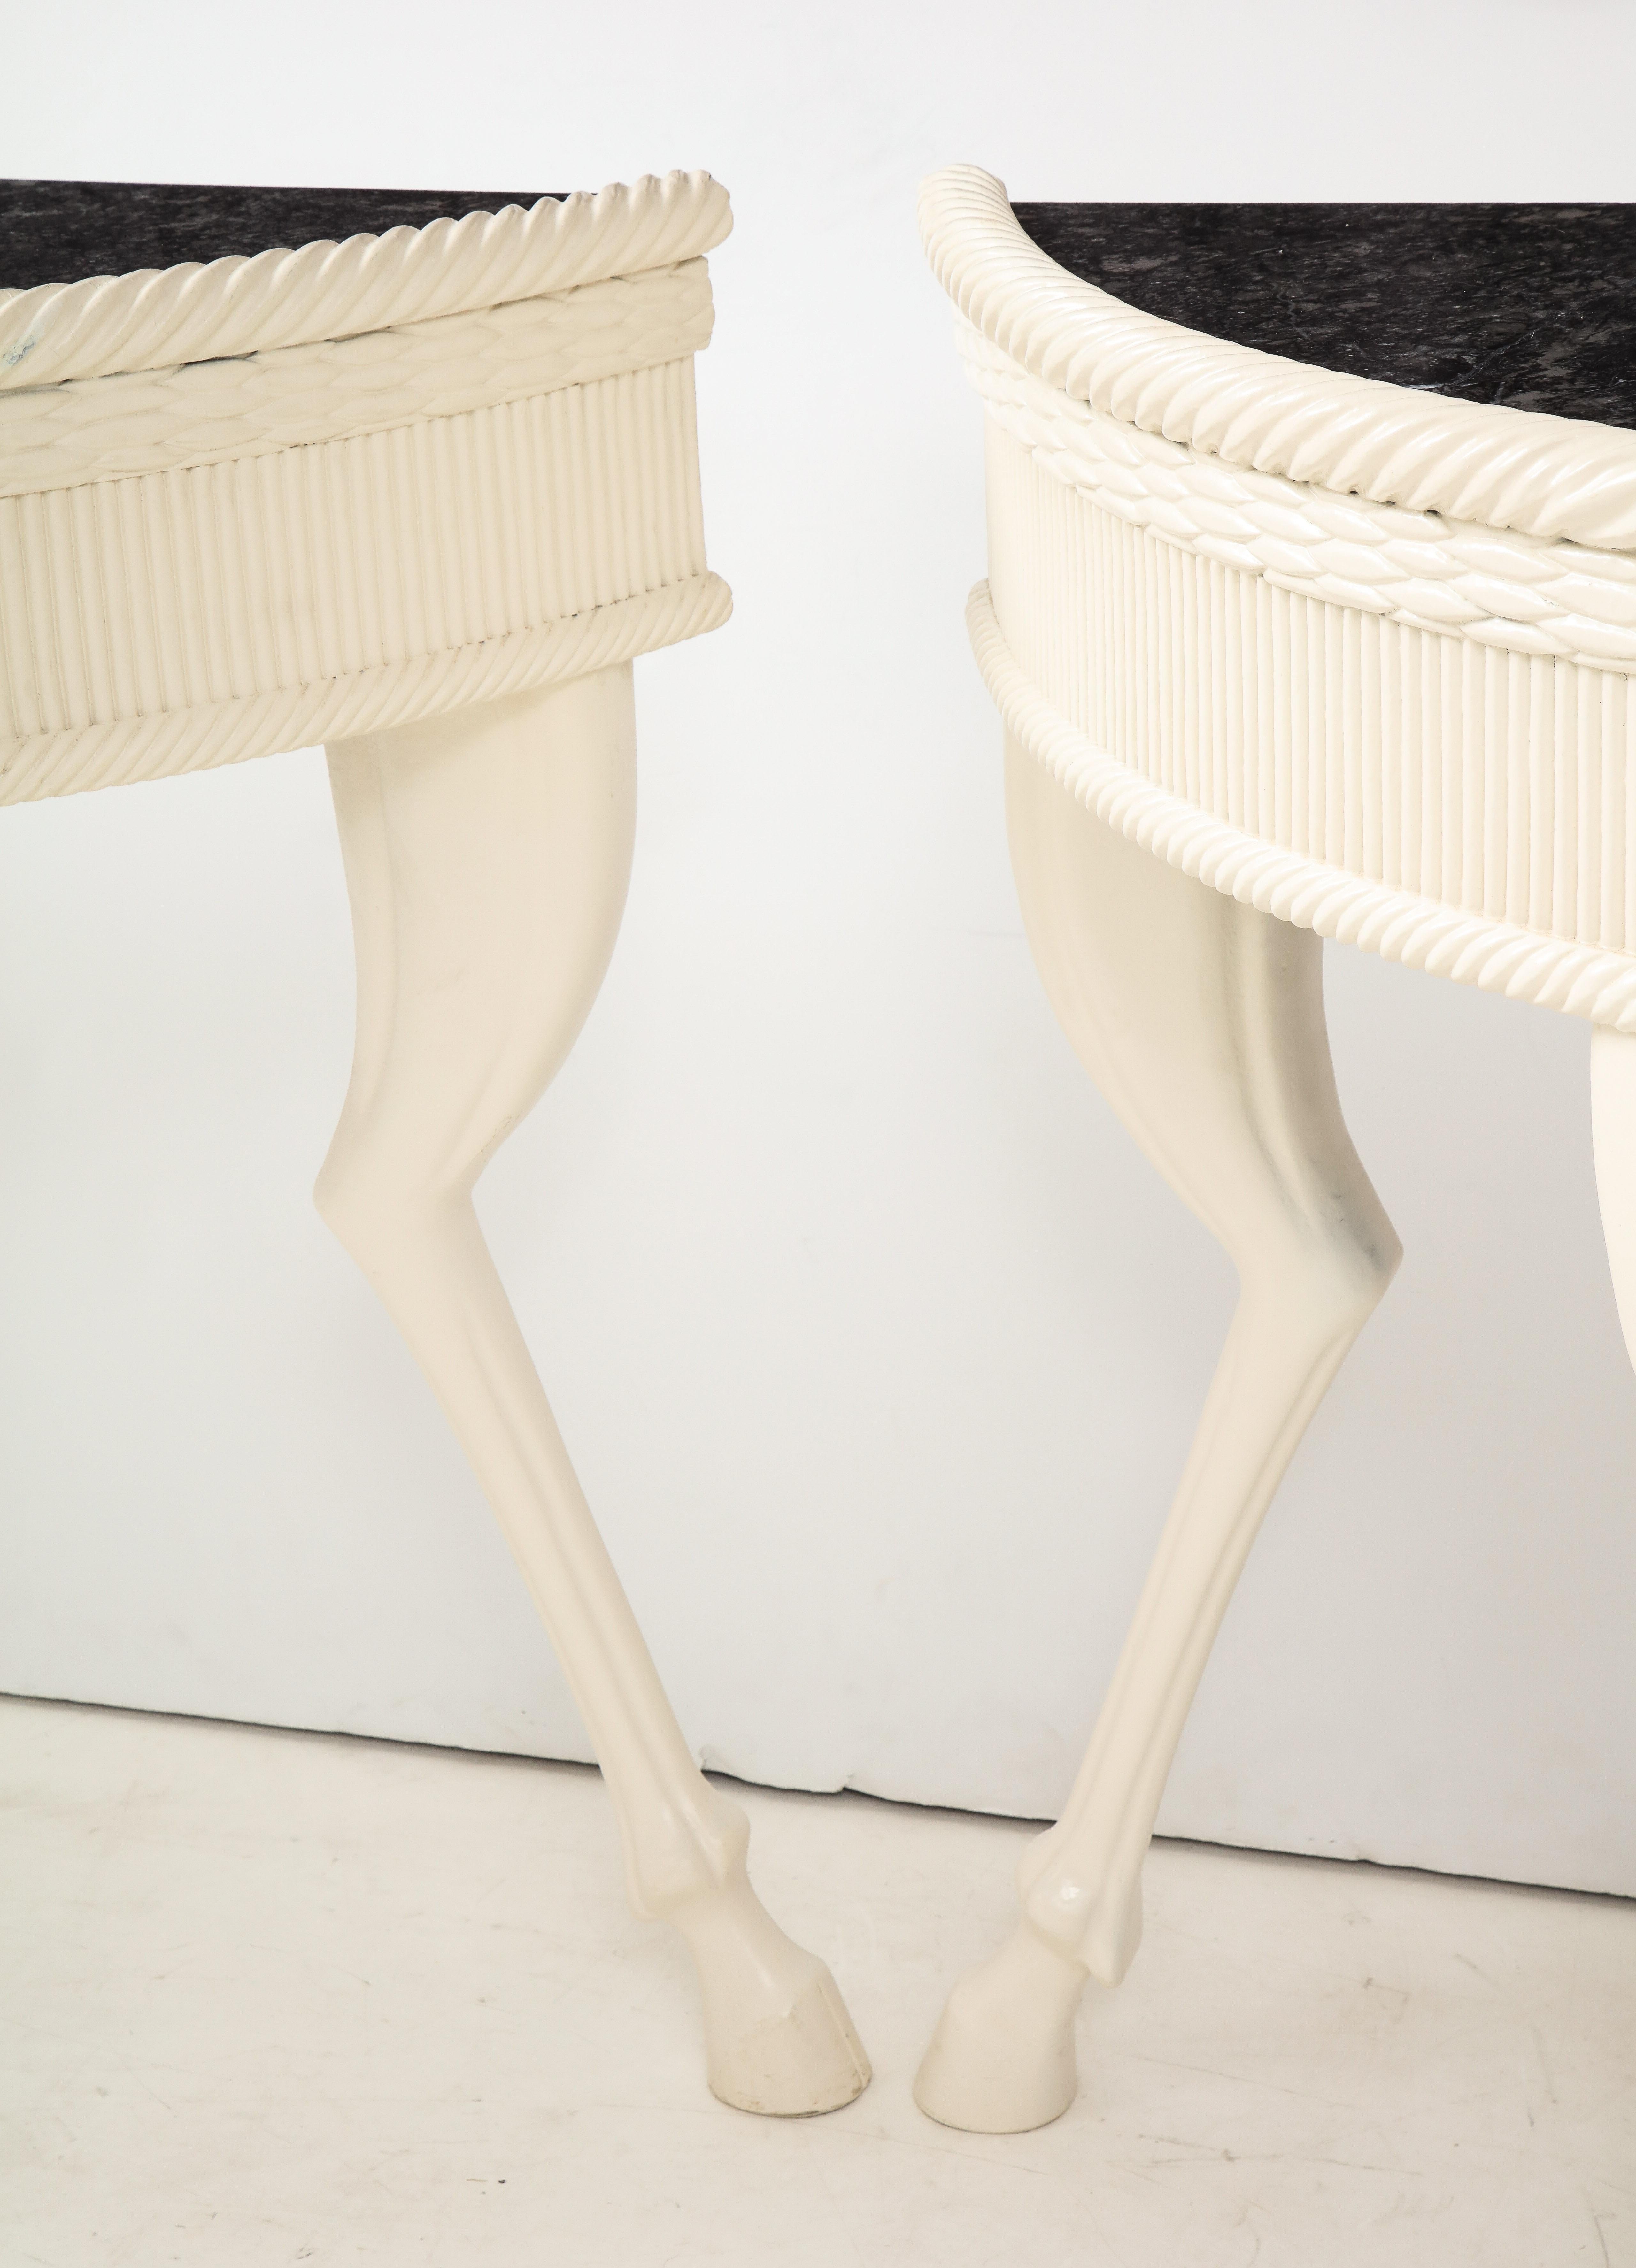 Lacquered Pair of Demilune Hoof Foot Console Tables